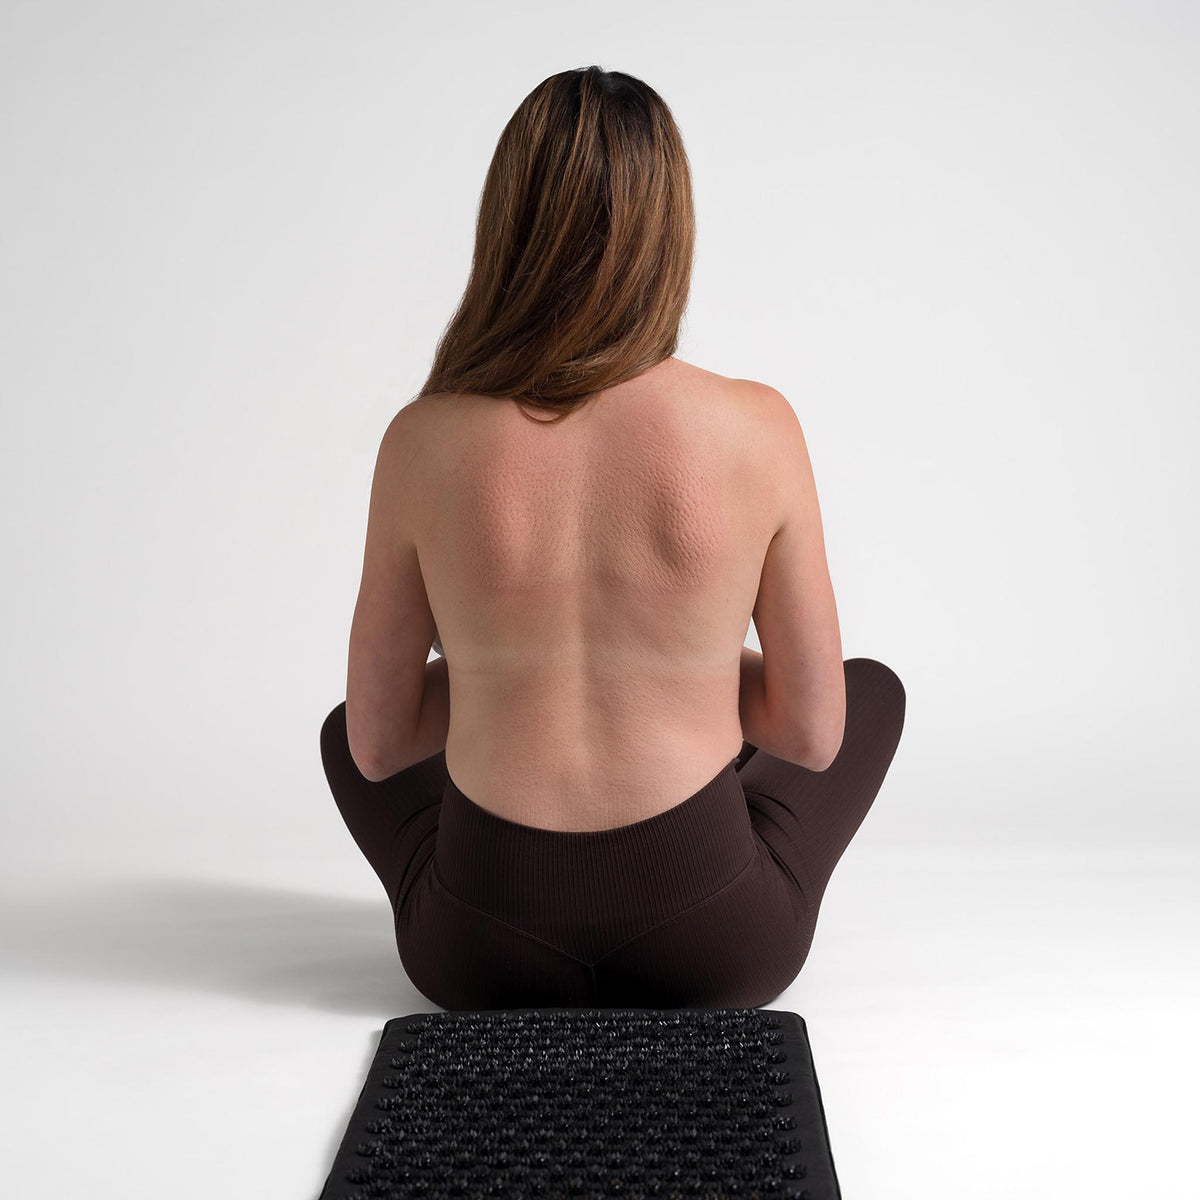 Shakti Mat For Yoga, Acupressure, And Pain Relief Relieves Stress, Spikes,  Discogs, Or Zafu Meditation Cushion 220627 From Piao09, $21.56